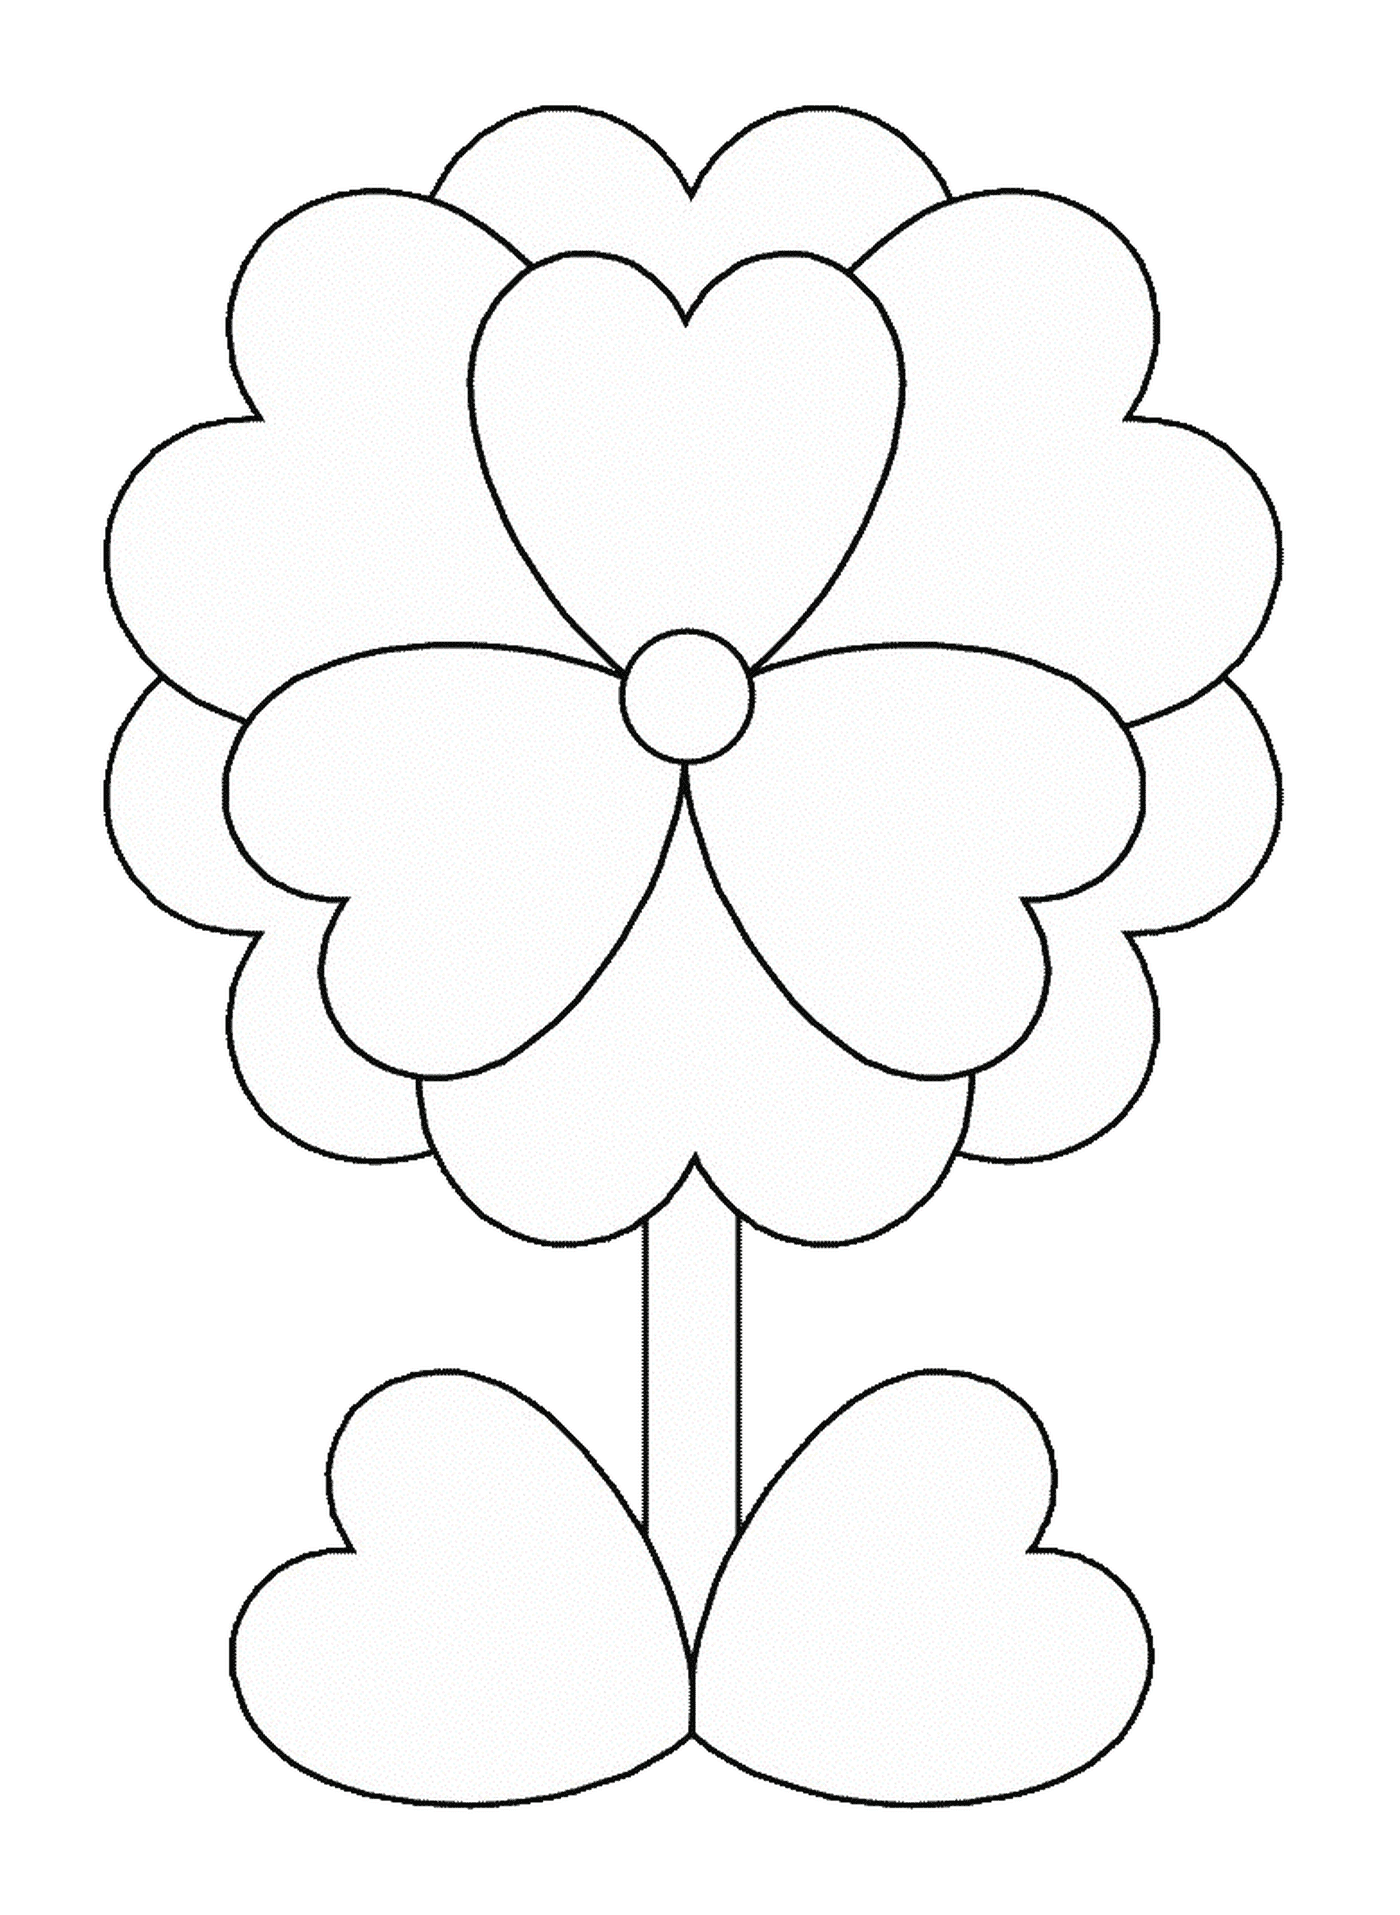  A flower of hearts 